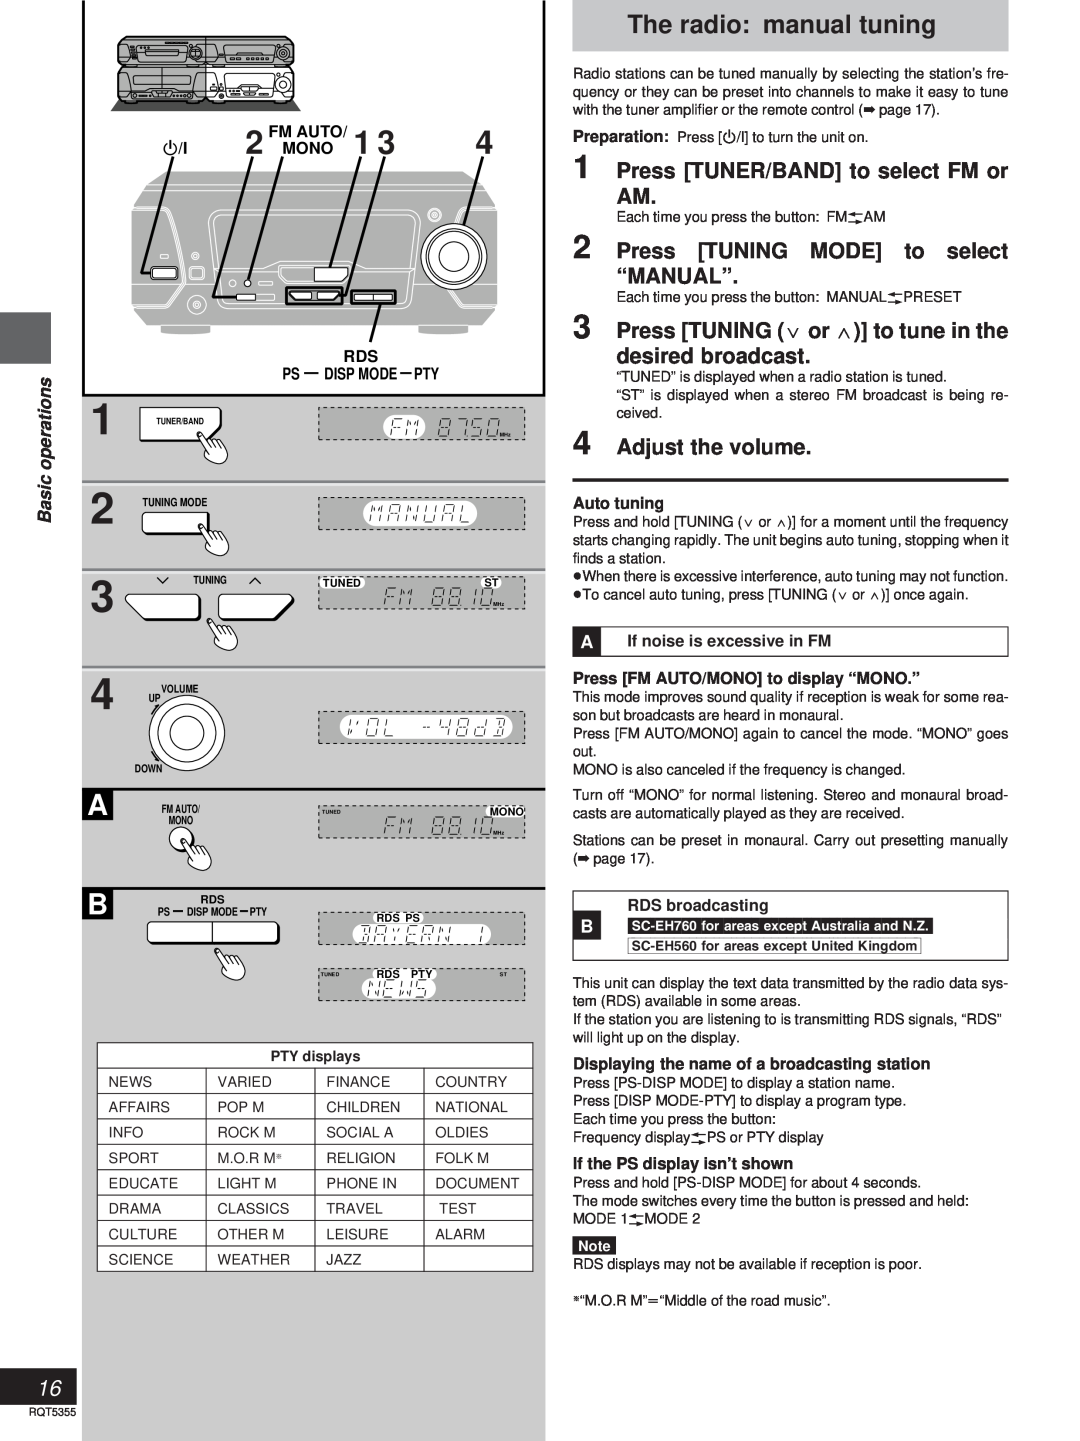 Technics SC-EH760 The radio manual tuning, Press TUNER/BAND to select FM or AM, Press TUNING MODE to select “MANUAL”, Mono 